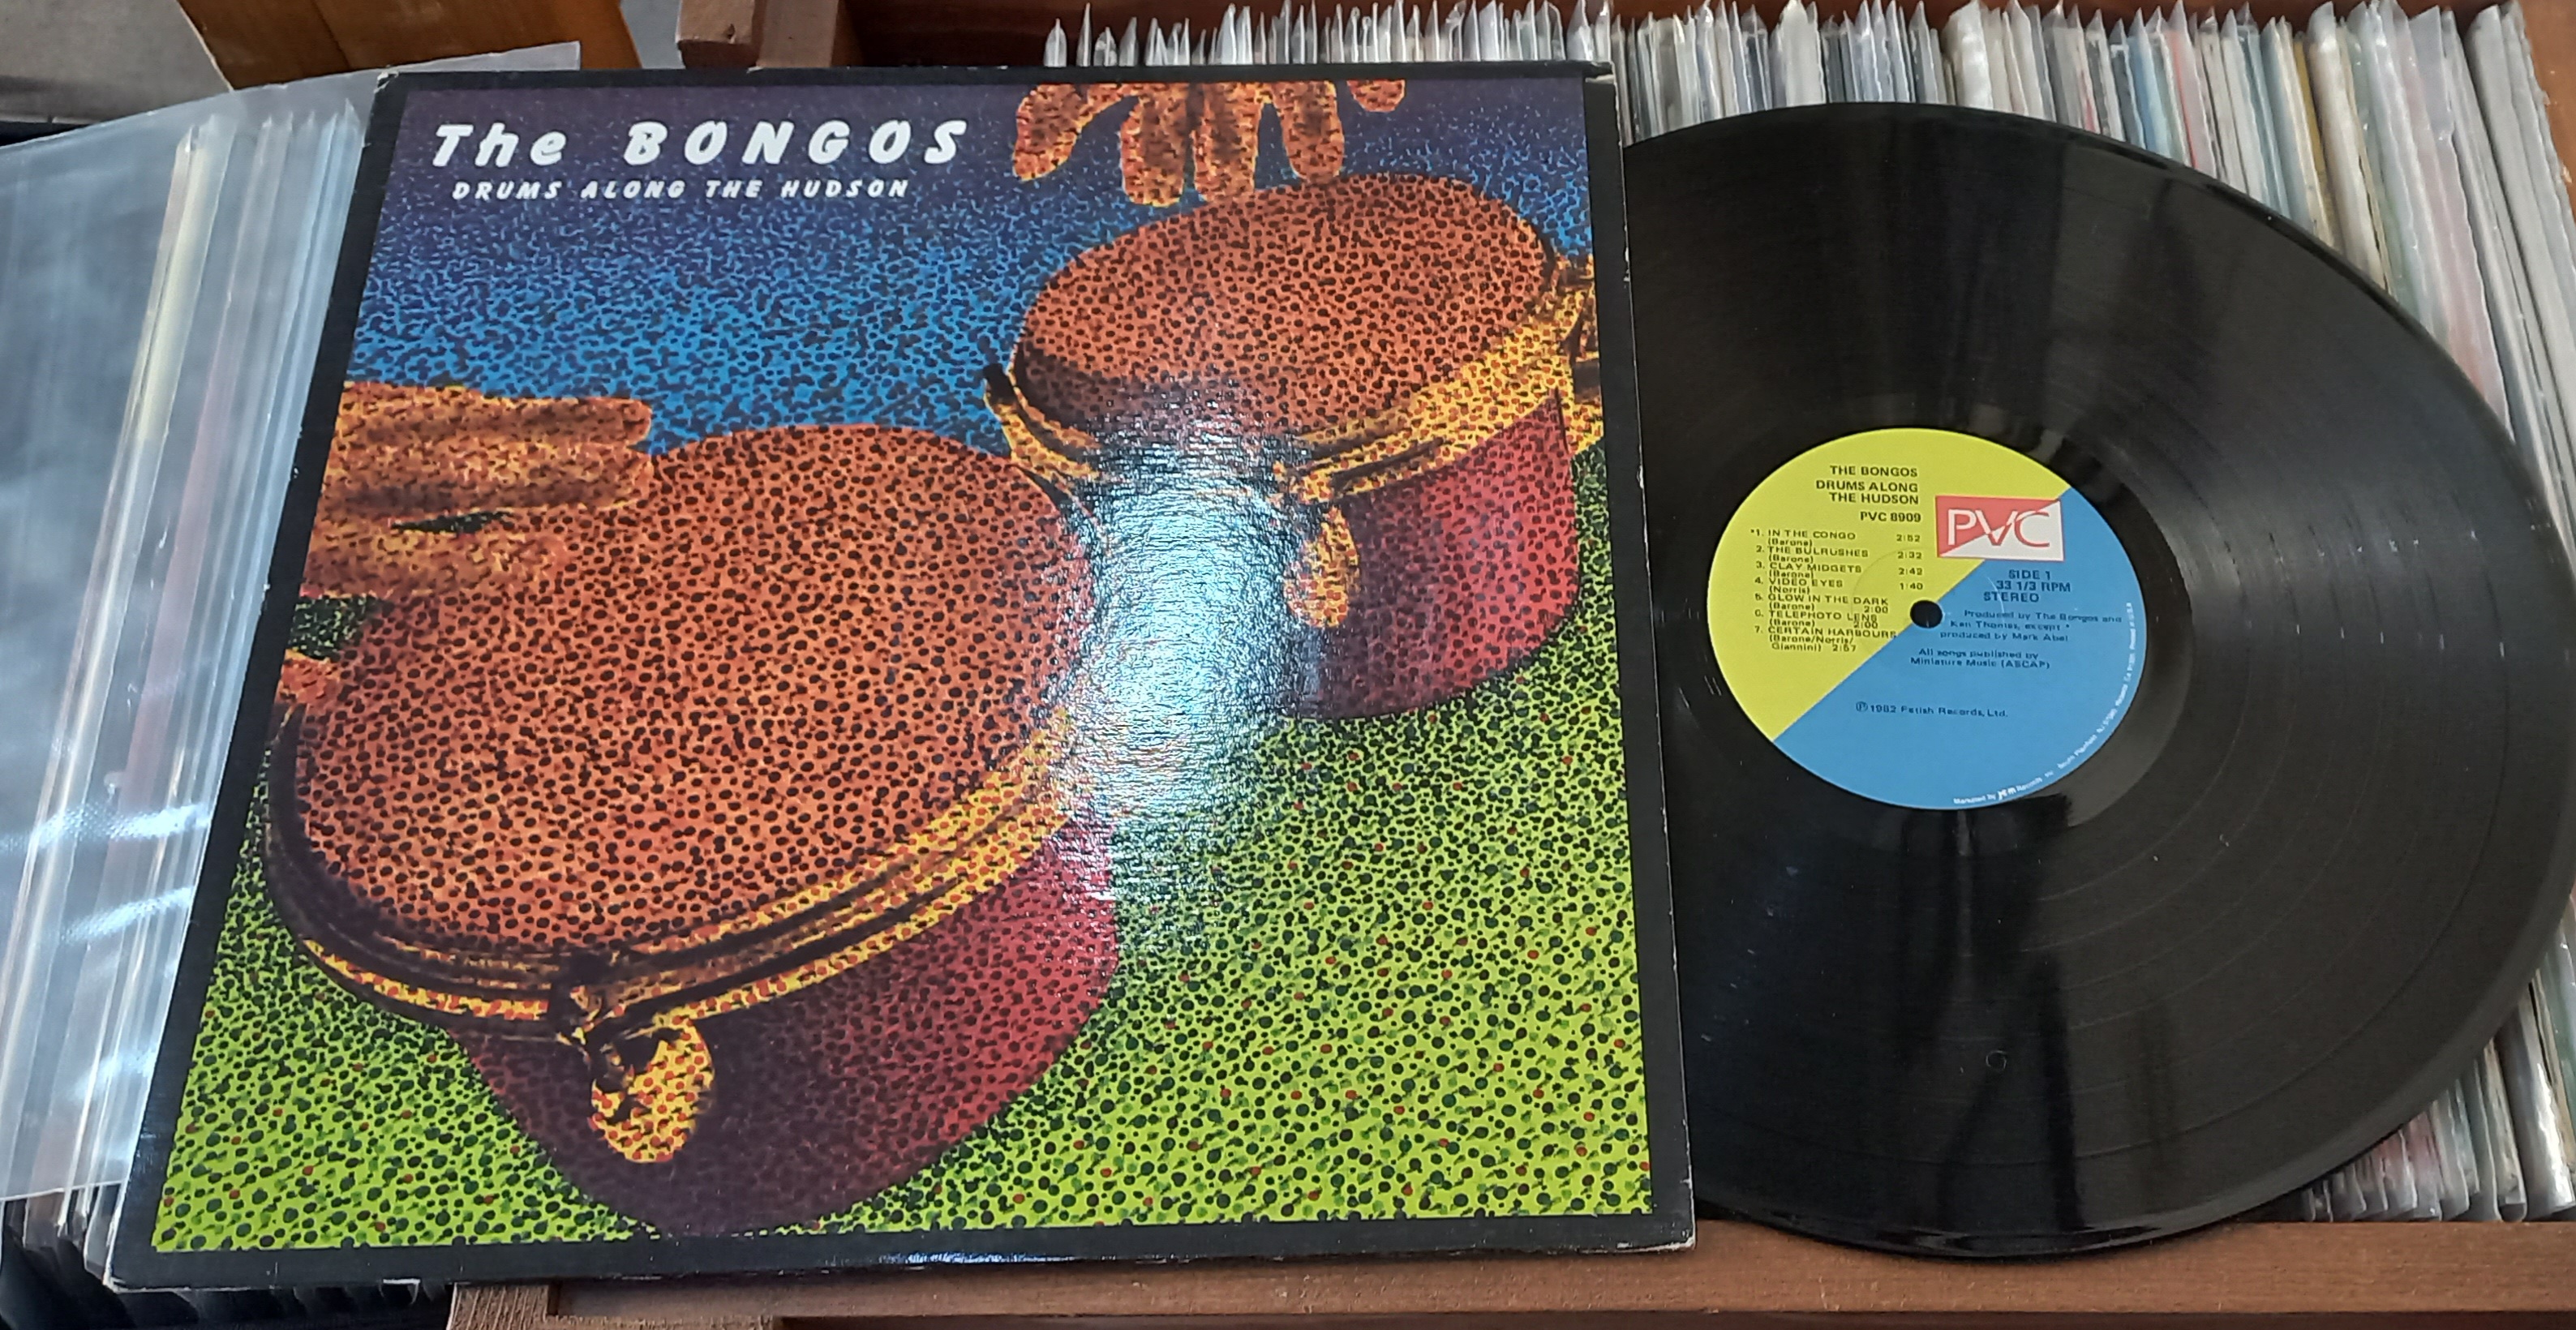 The Bongos – Drums Along The Hudson